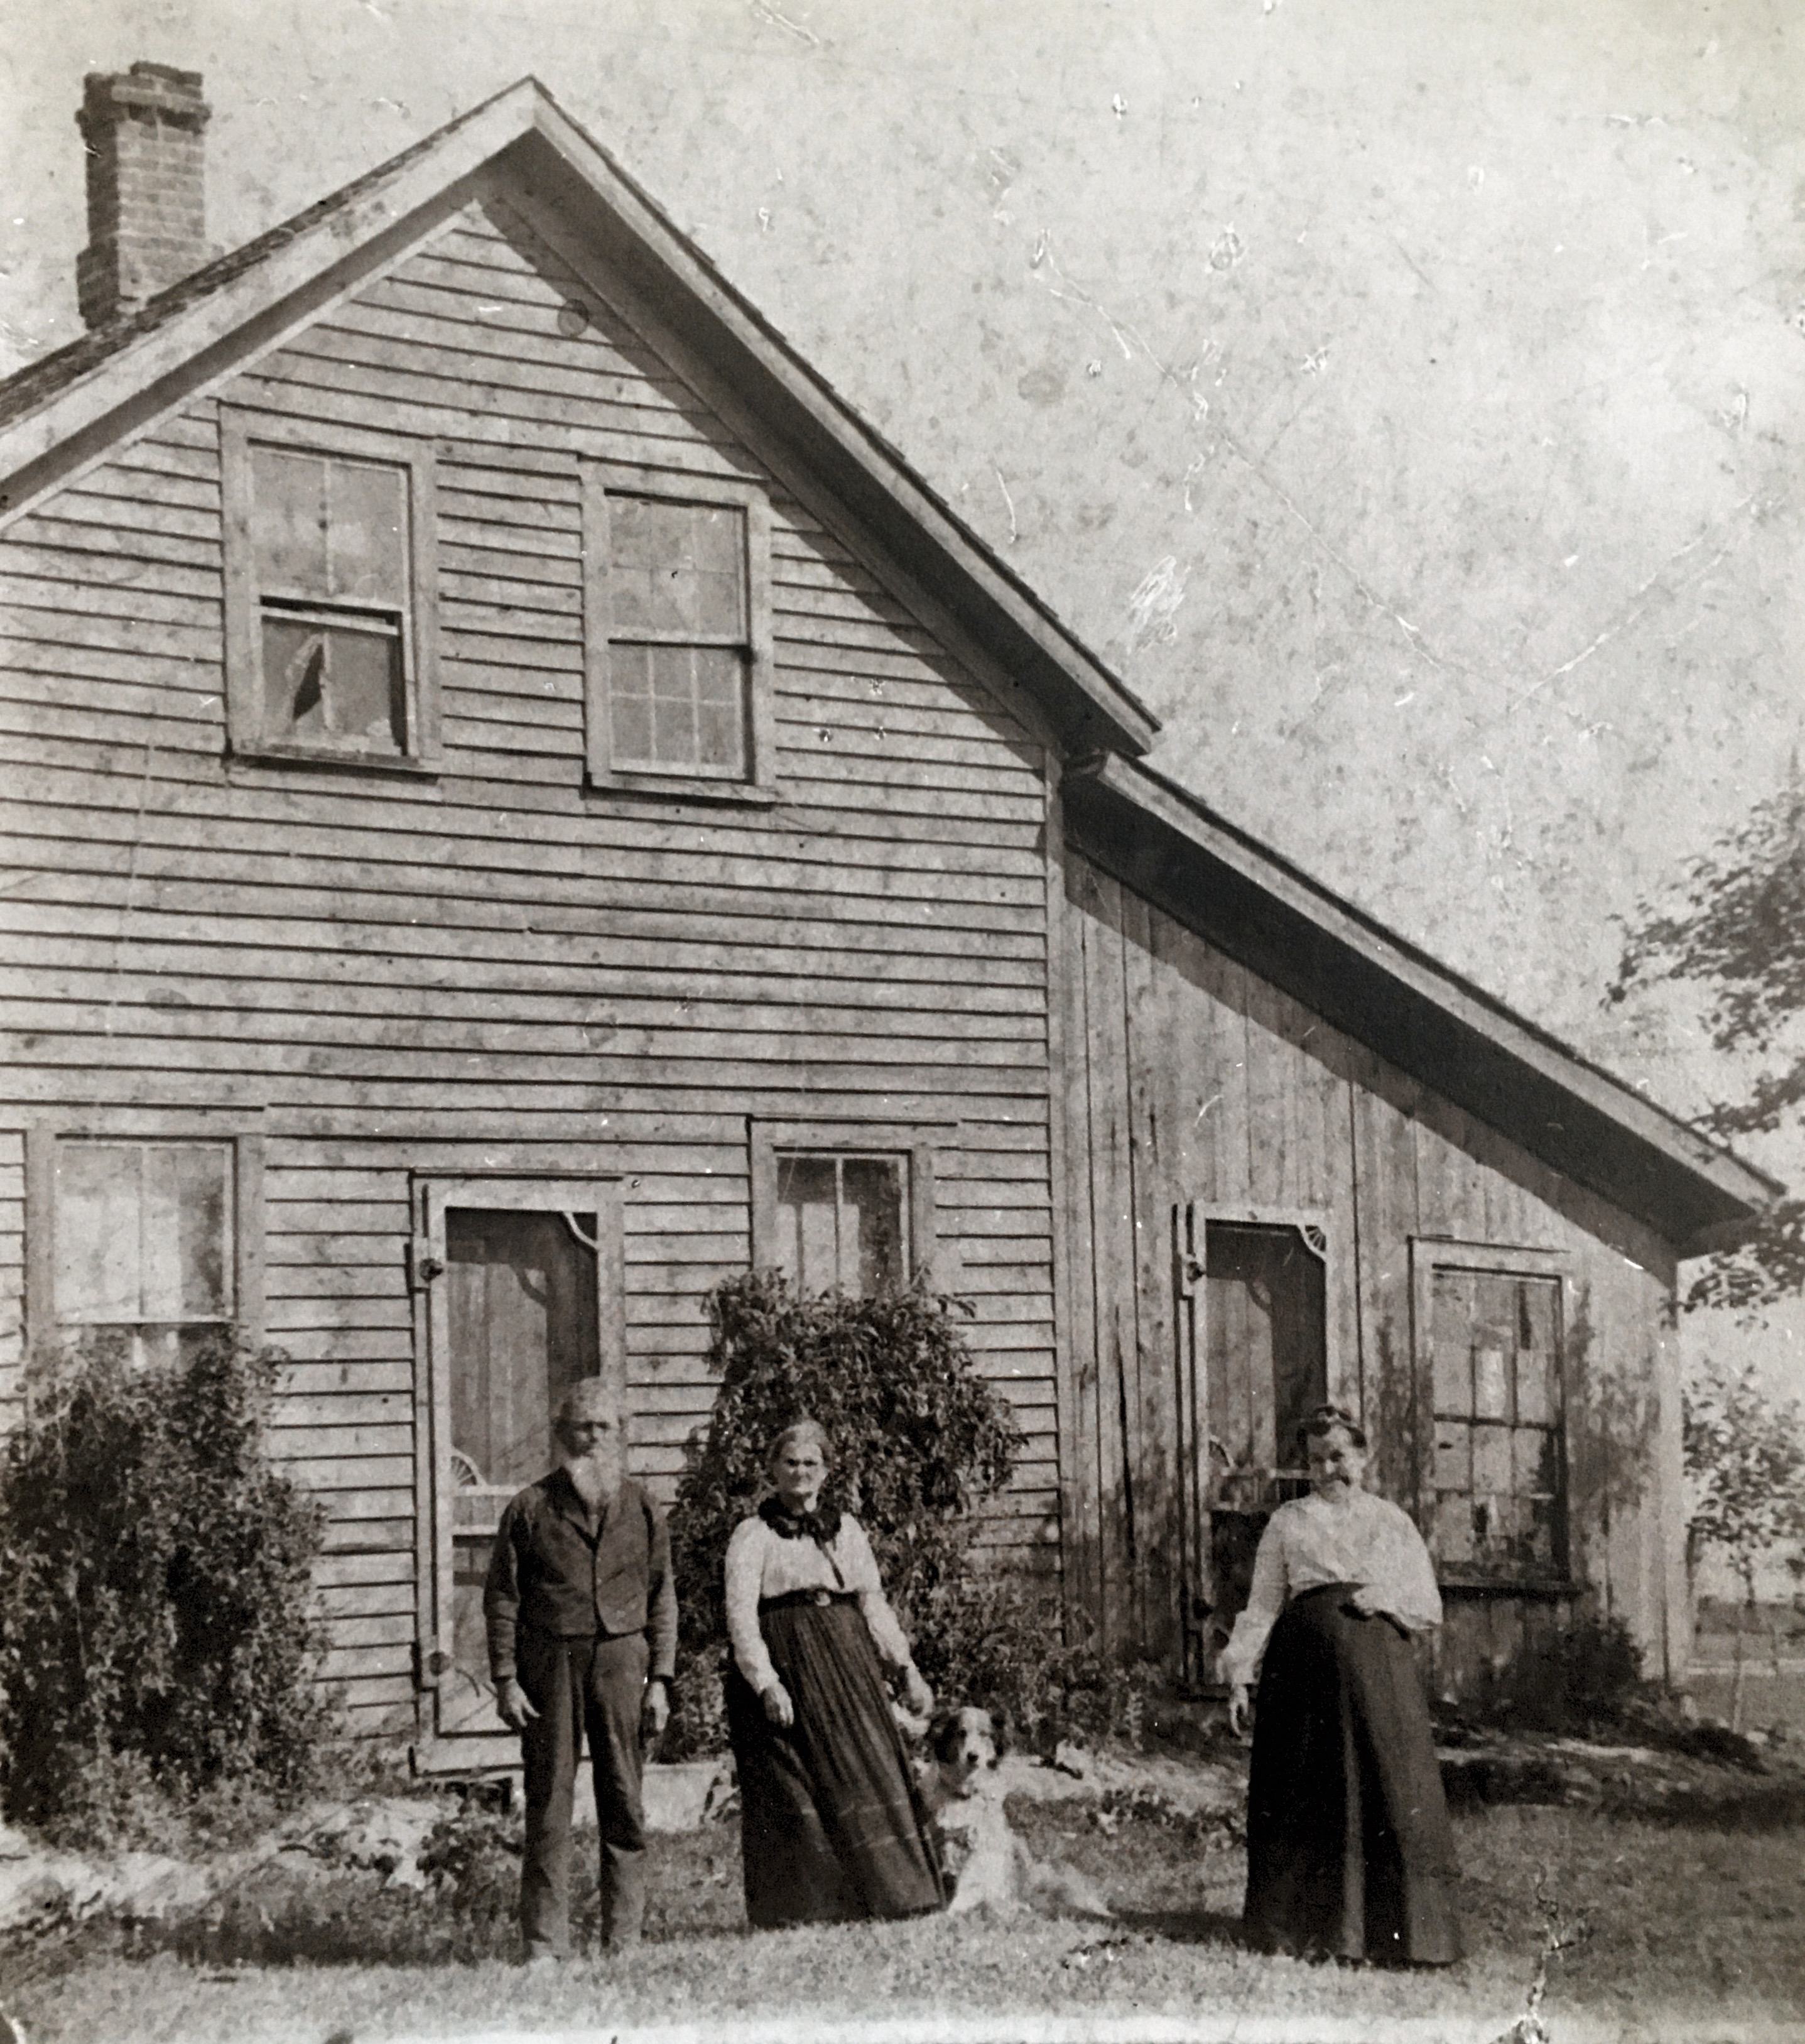 James and Eliza Alexander Farm with sister Maria (on right) - Cedardale, Michigan 1869